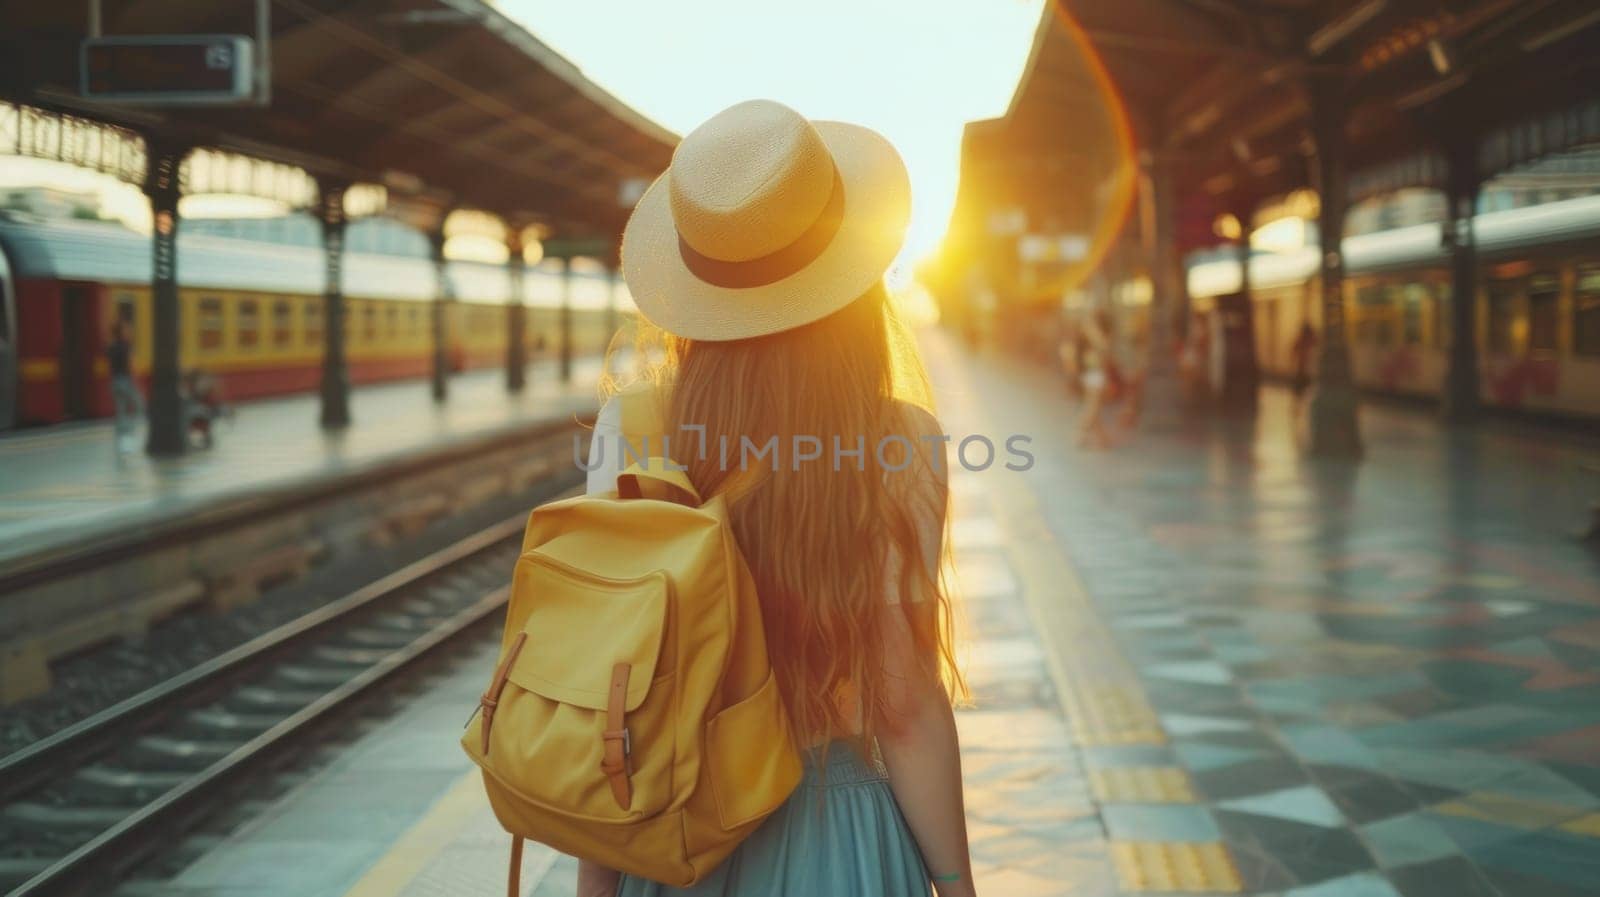 A woman wearing a straw hat and wear dress is standing on a train platform by golfmerrymaker